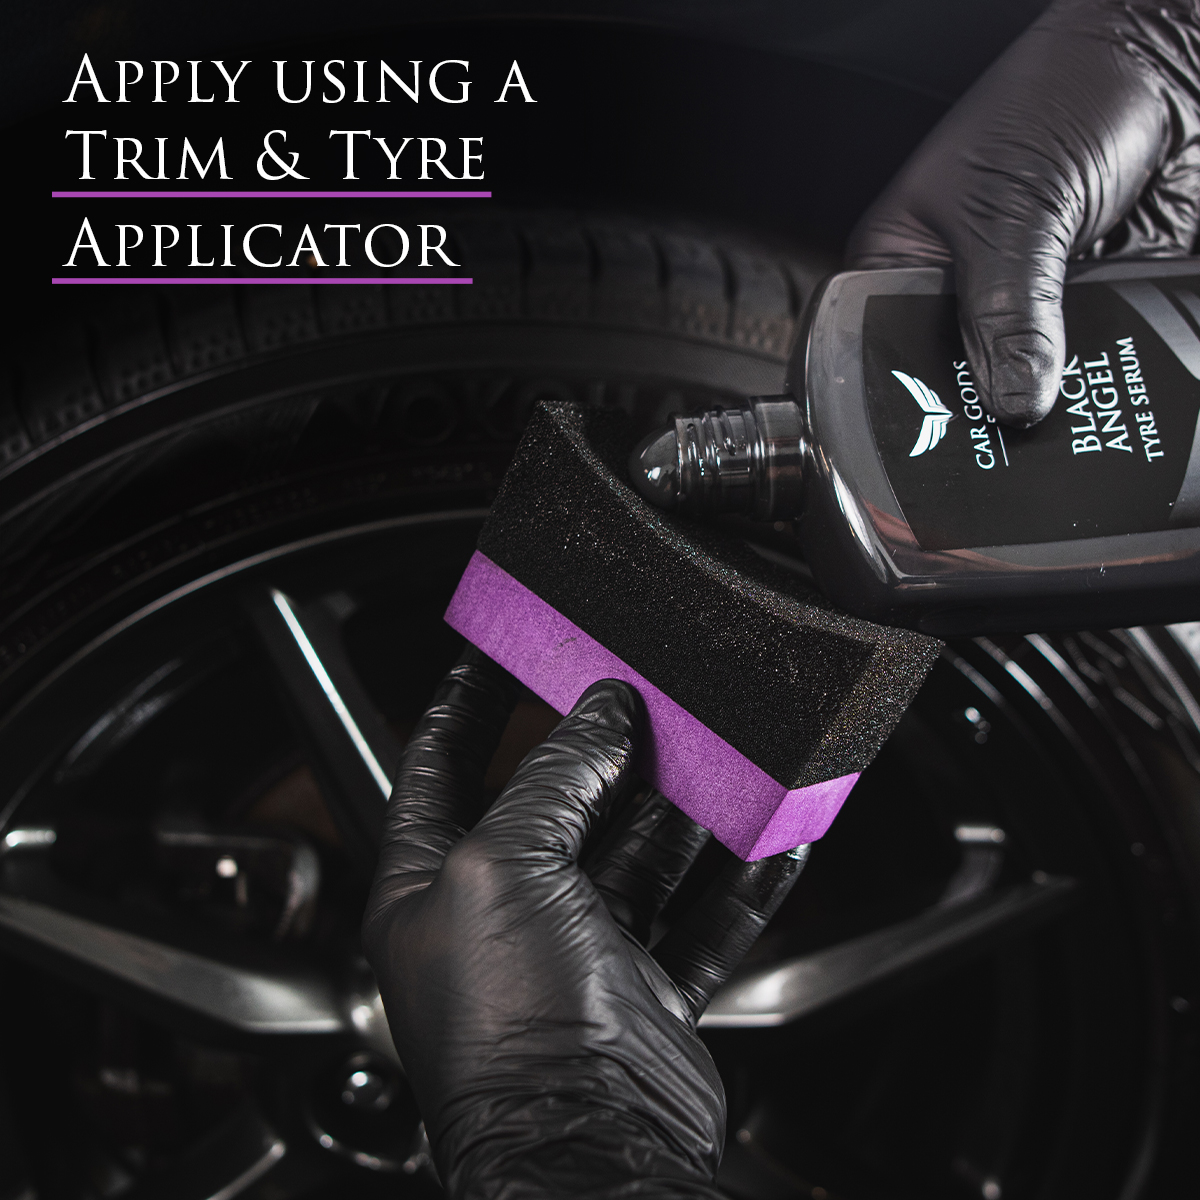 Can be applied using a microfibre cloth or a Trim & Tyre Applicator